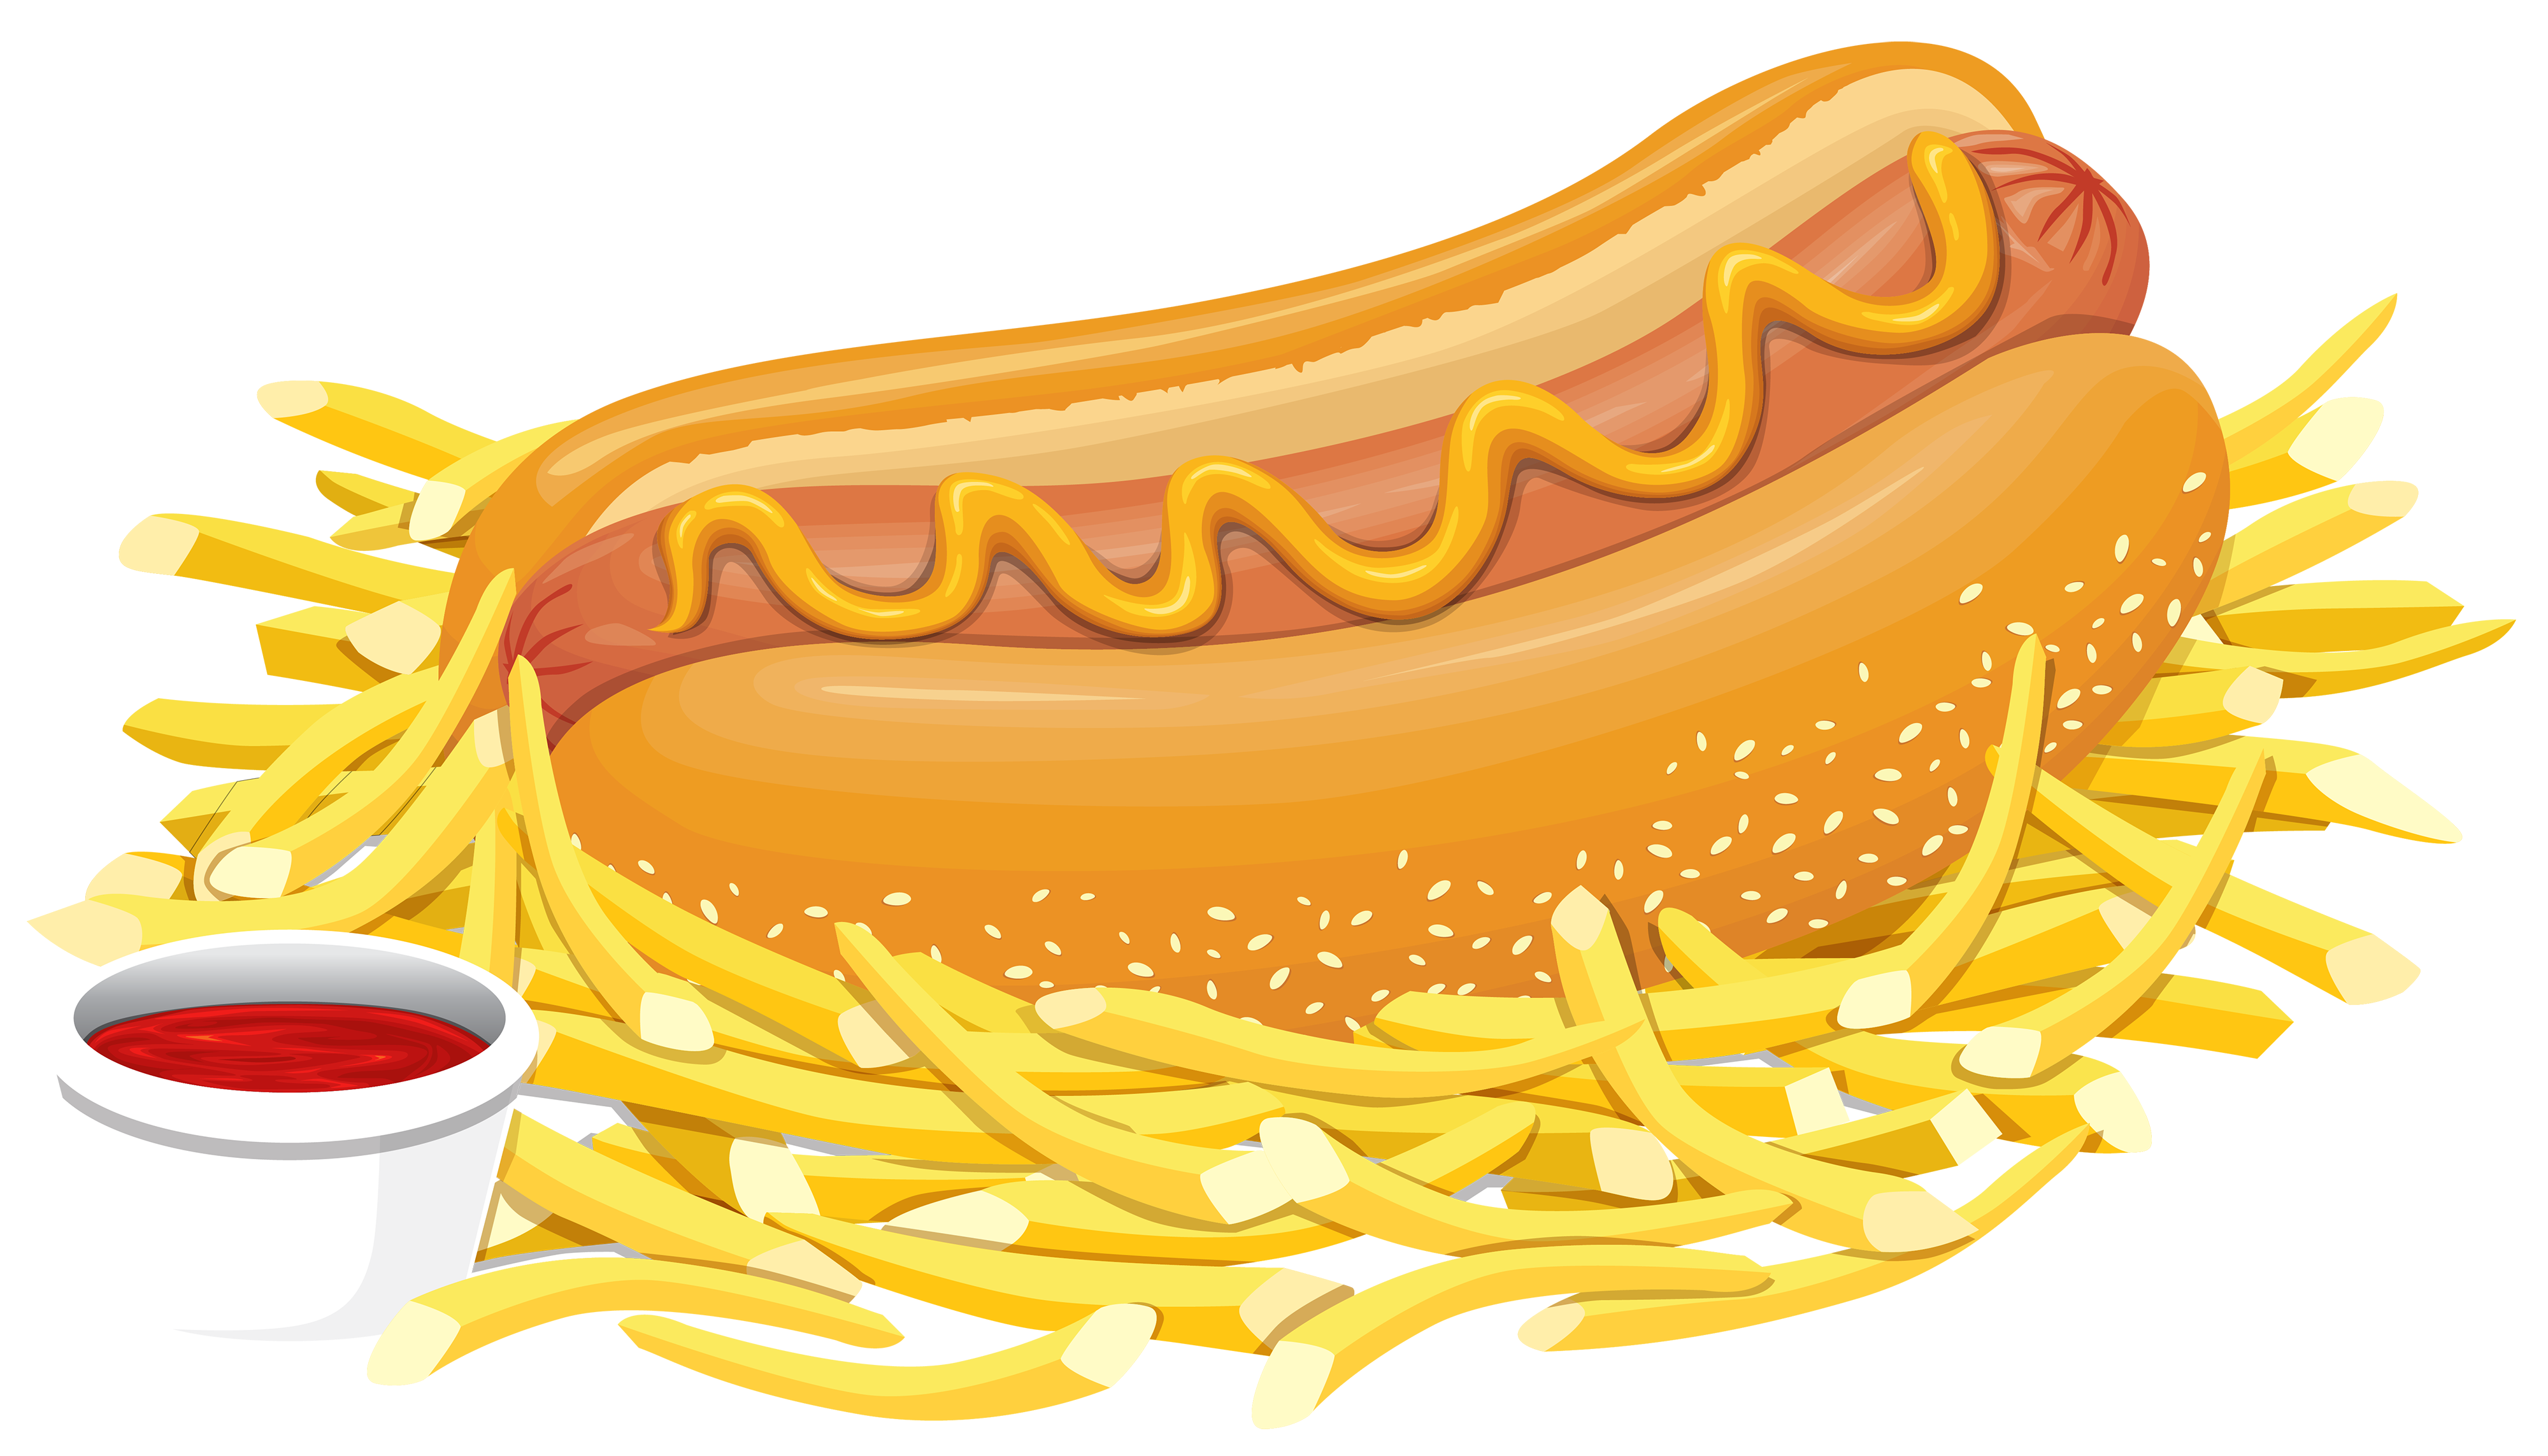 hot dog and chips clip art